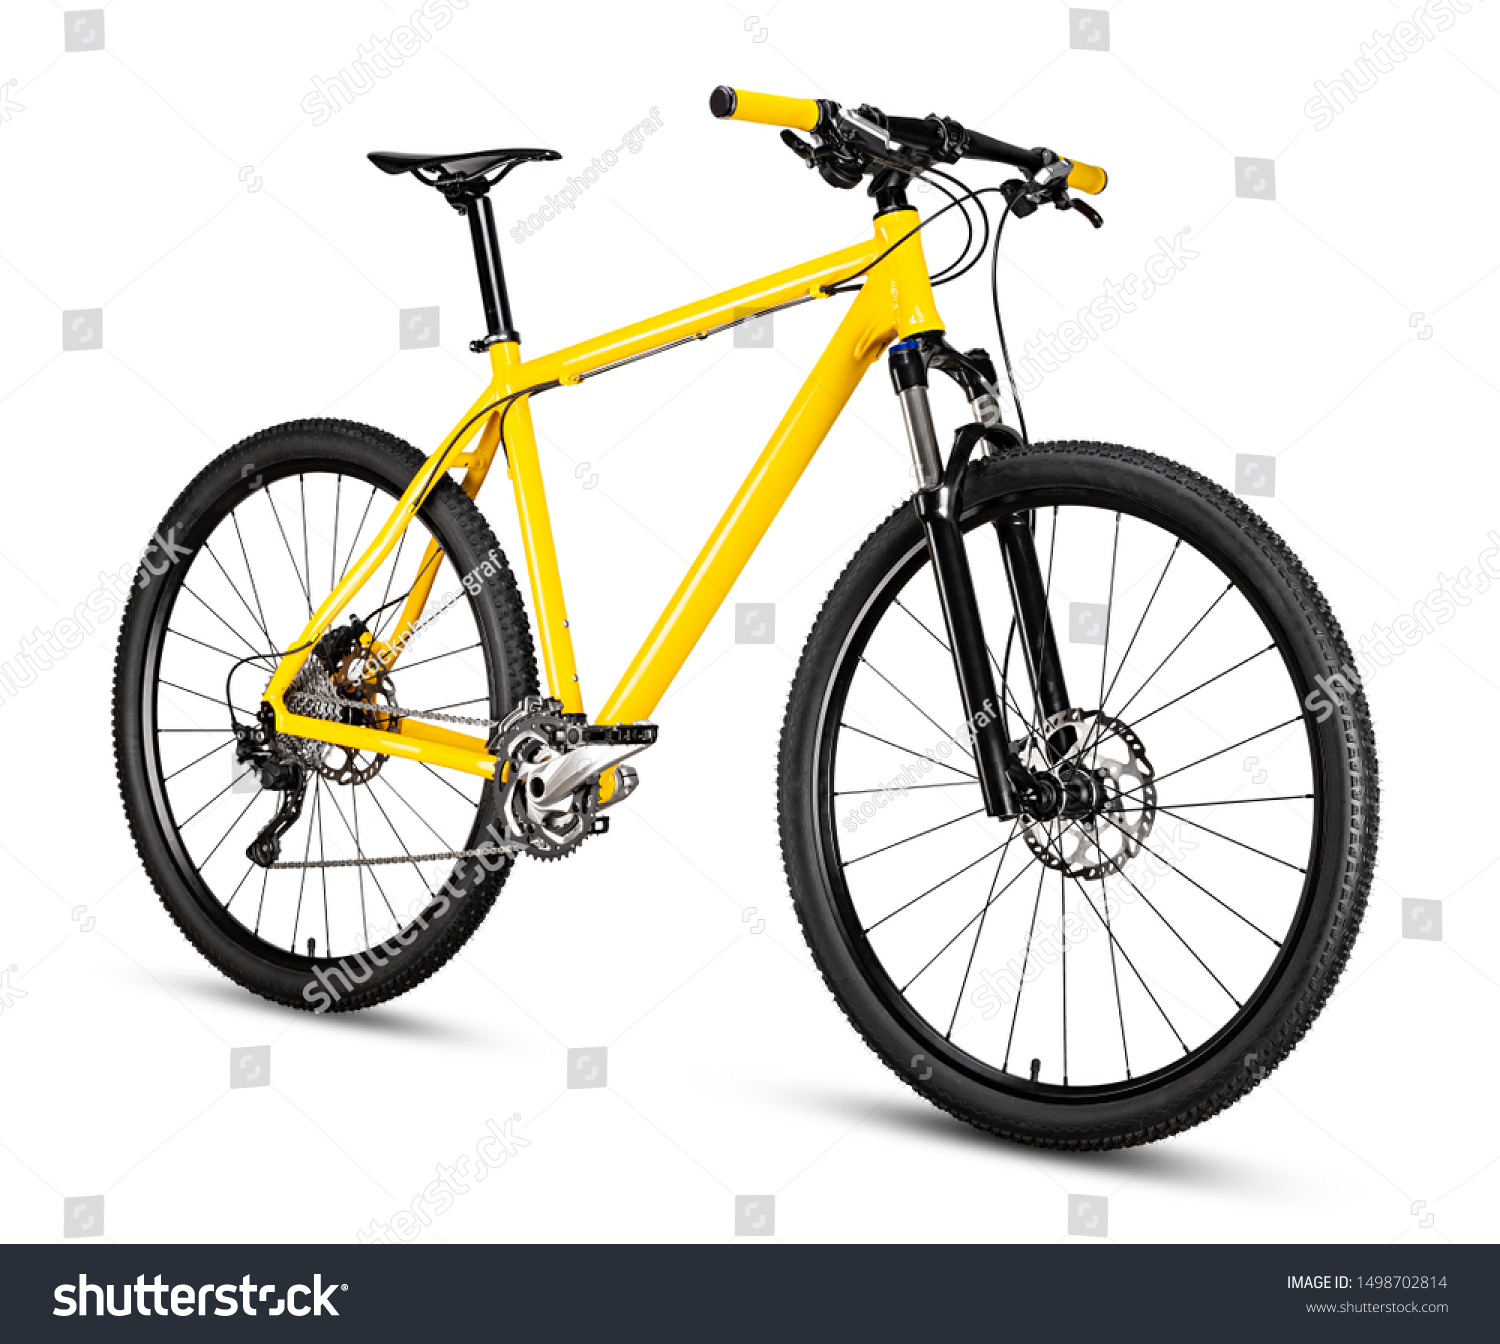 yellow black 29er mountainbike with thick offroad tyres. bicycle mtb cross country aluminum, cycling sport transport concept isolated on white background #1498702814